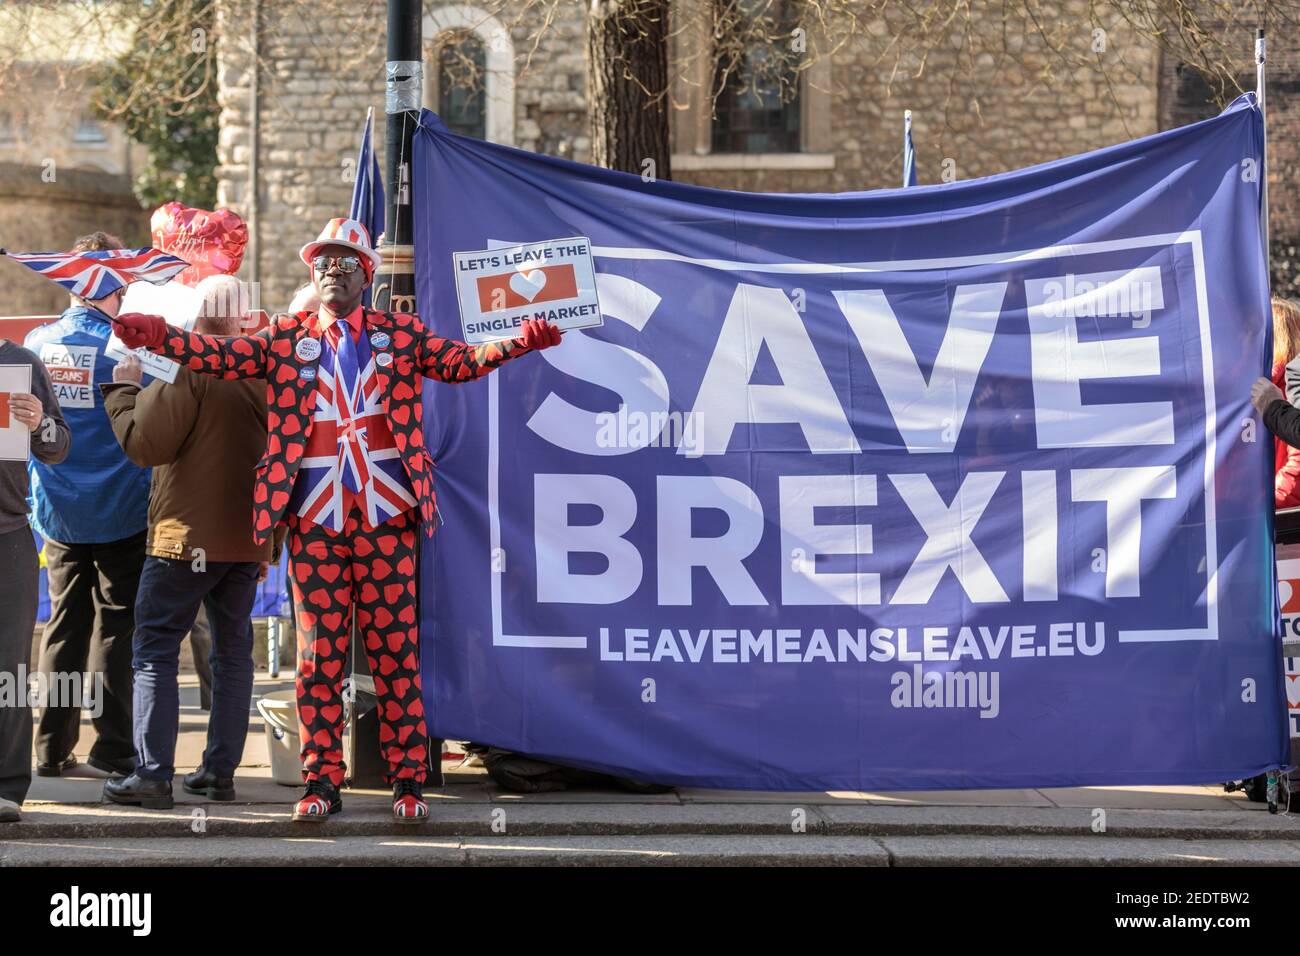 Pro Brexit campaign protesters, including activist Joseph Afrane (m) at a 'Save Brexit' Leave Means Leave rally in Westminster, London Stock Photo